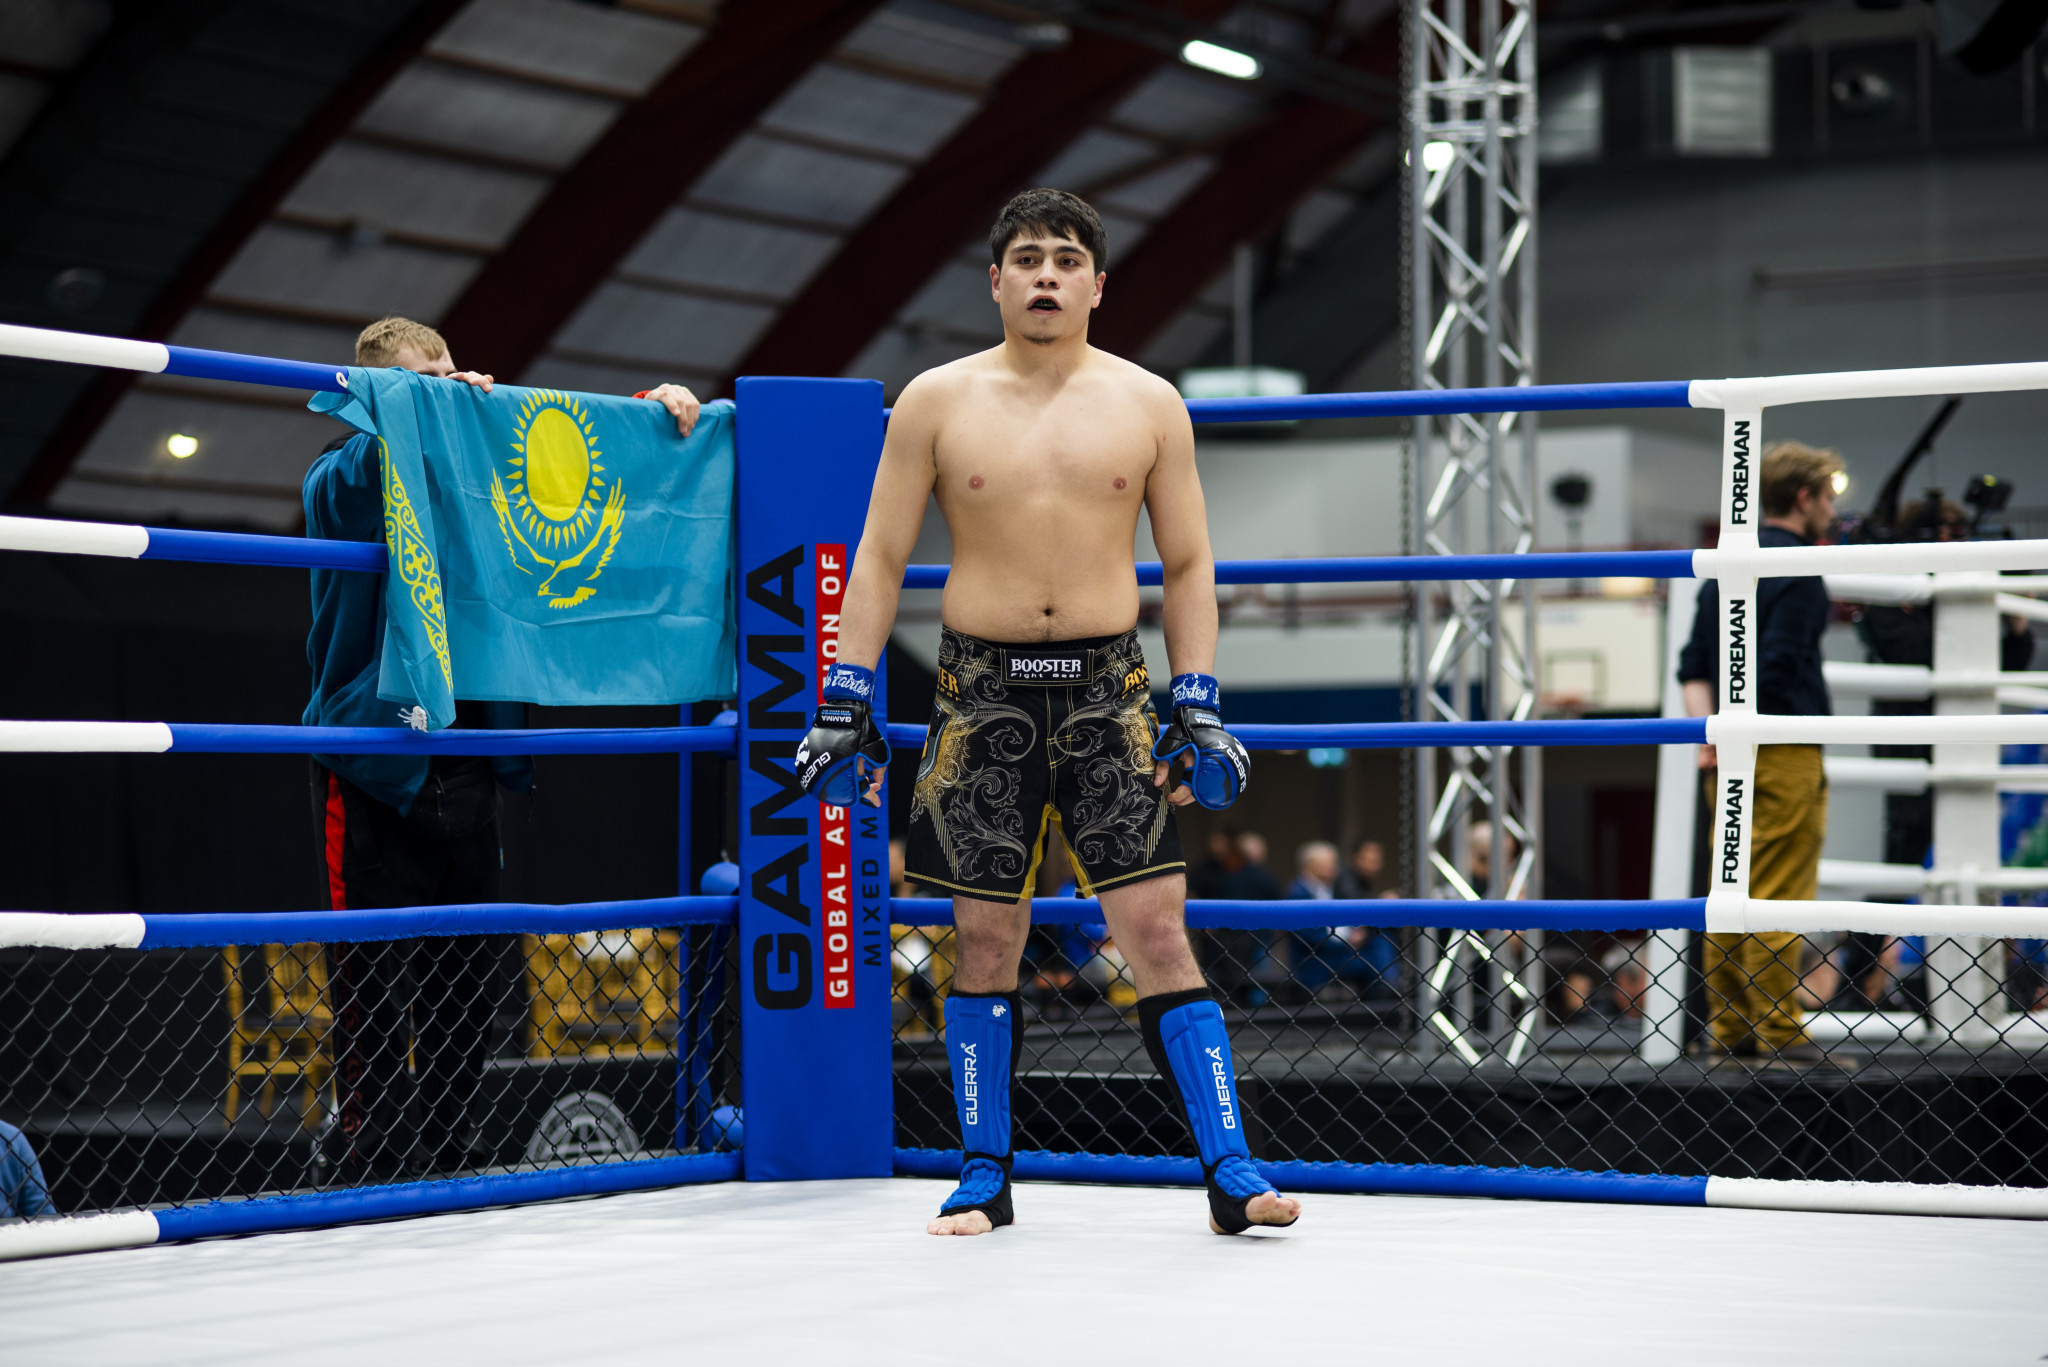 Kazakhstan steamroll competition in day two of GAMMA World MMA Championships